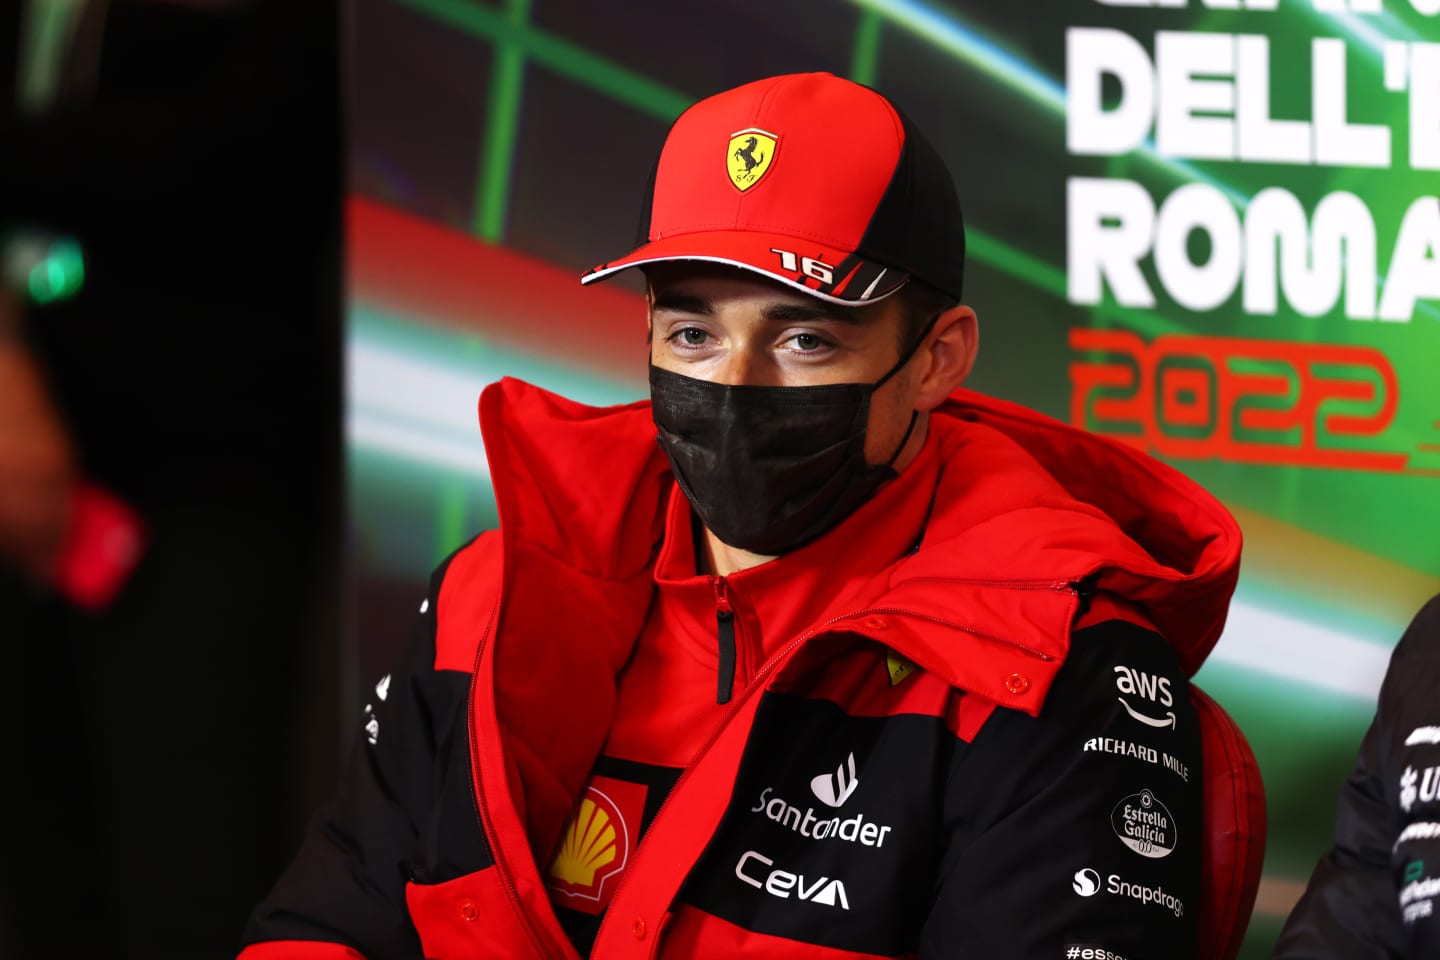 IMOLA, ITALY - APRIL 22: Charles Leclerc of Monaco and Ferrari talks in the Drivers Press Conference prior to practice ahead of the F1 Grand Prix of Emilia Romagna at Autodromo Enzo e Dino Ferrari on April 22, 2022 in Imola, Italy. (Photo by Lars Baron/Getty Images)